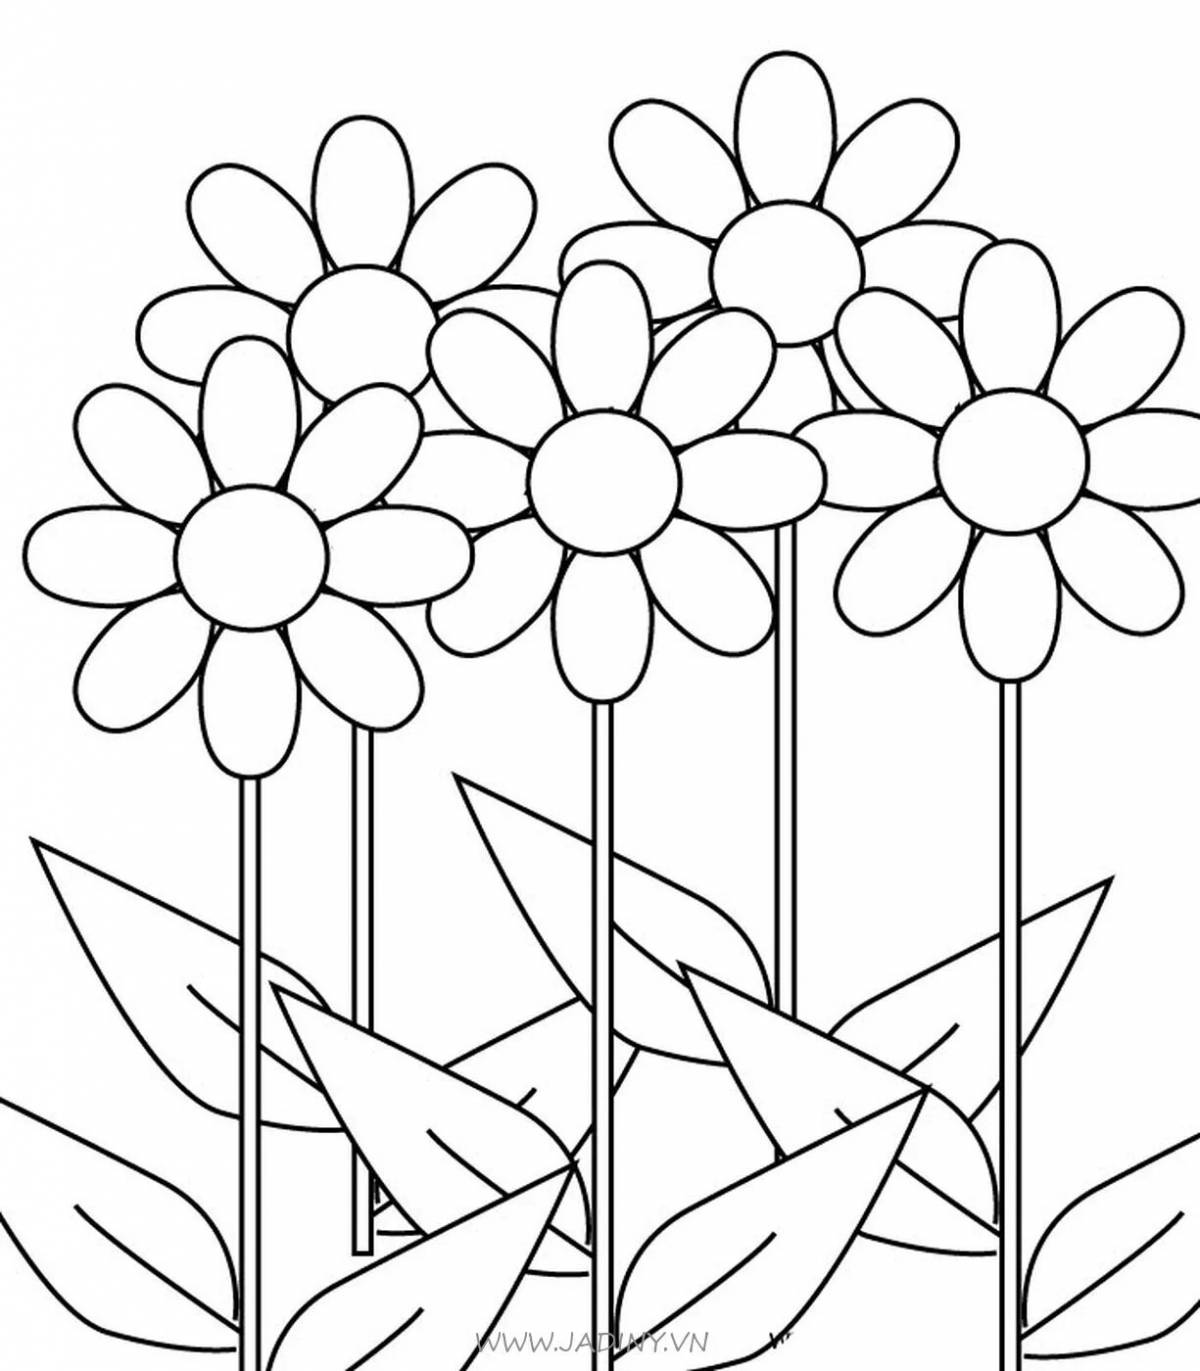 Fabulous flower coloring pages for kids